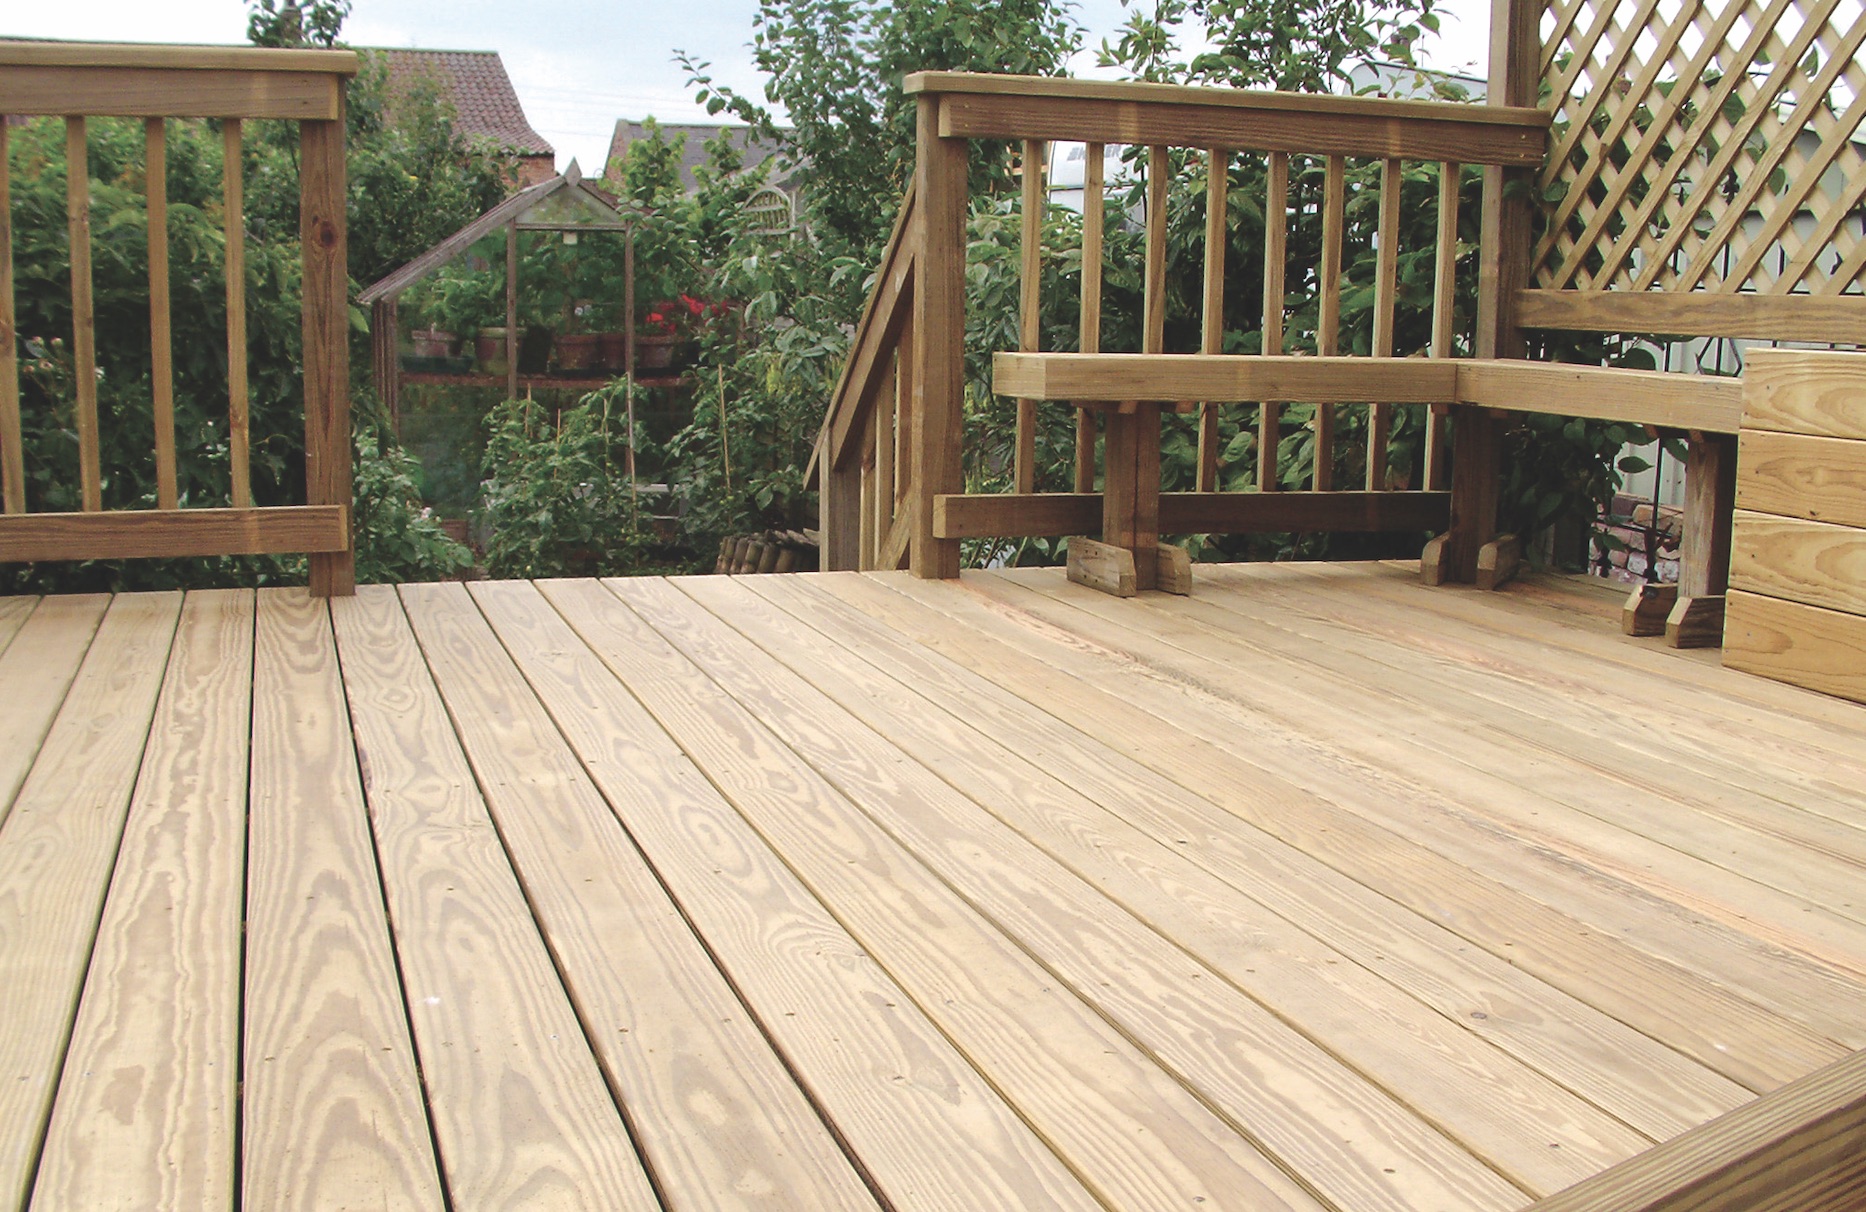 southern pine wood decking installed on a single family home